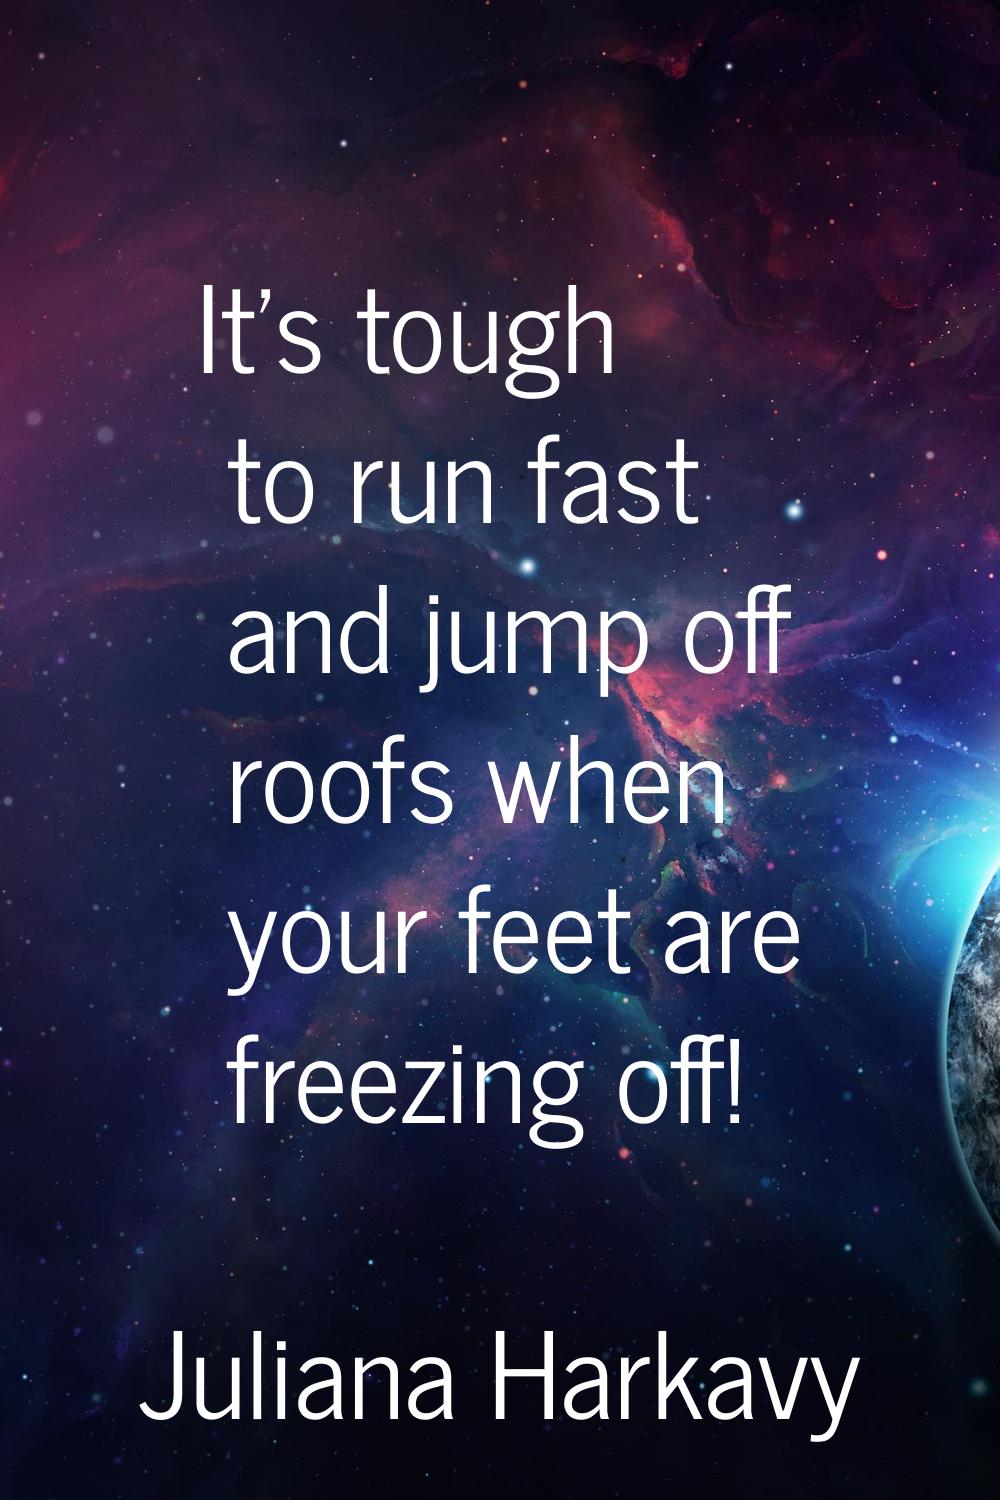 It's tough to run fast and jump off roofs when your feet are freezing off!